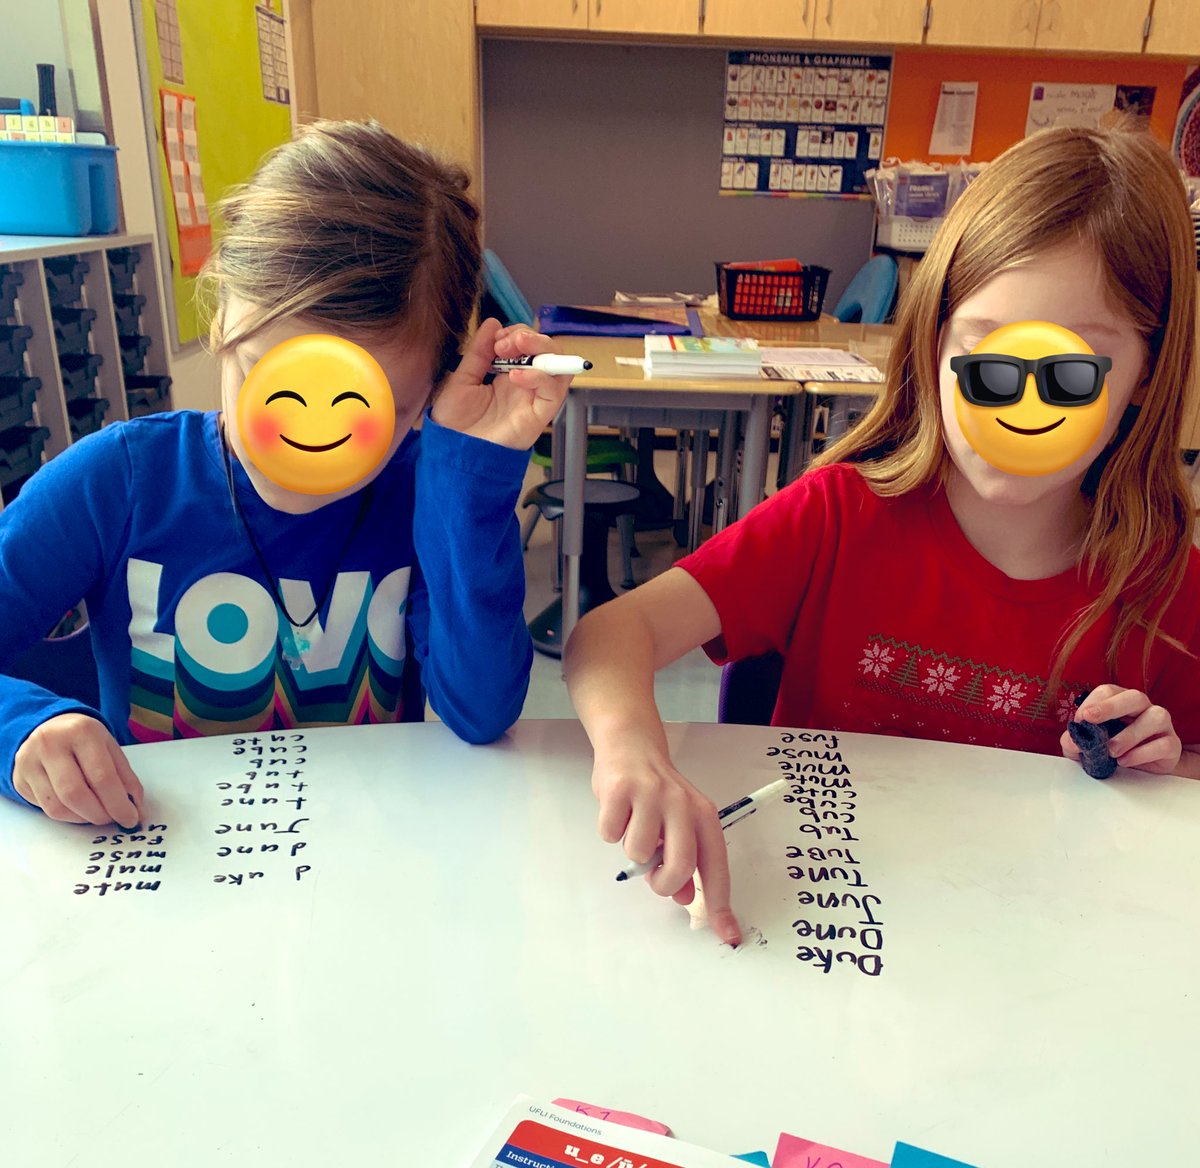 Picking up speed and accuracy with word ladders ✍️🪜 <a target='_blank' href='http://twitter.com/APSCARDPR'>@APSCARDPR</a> <a target='_blank' href='http://twitter.com/APSCardinalElem'>@APSCardinalElem</a> <a target='_blank' href='http://twitter.com/APSLiteracy'>@APSLiteracy</a> <a target='_blank' href='https://t.co/3o4IhBpCdo'>https://t.co/3o4IhBpCdo</a>